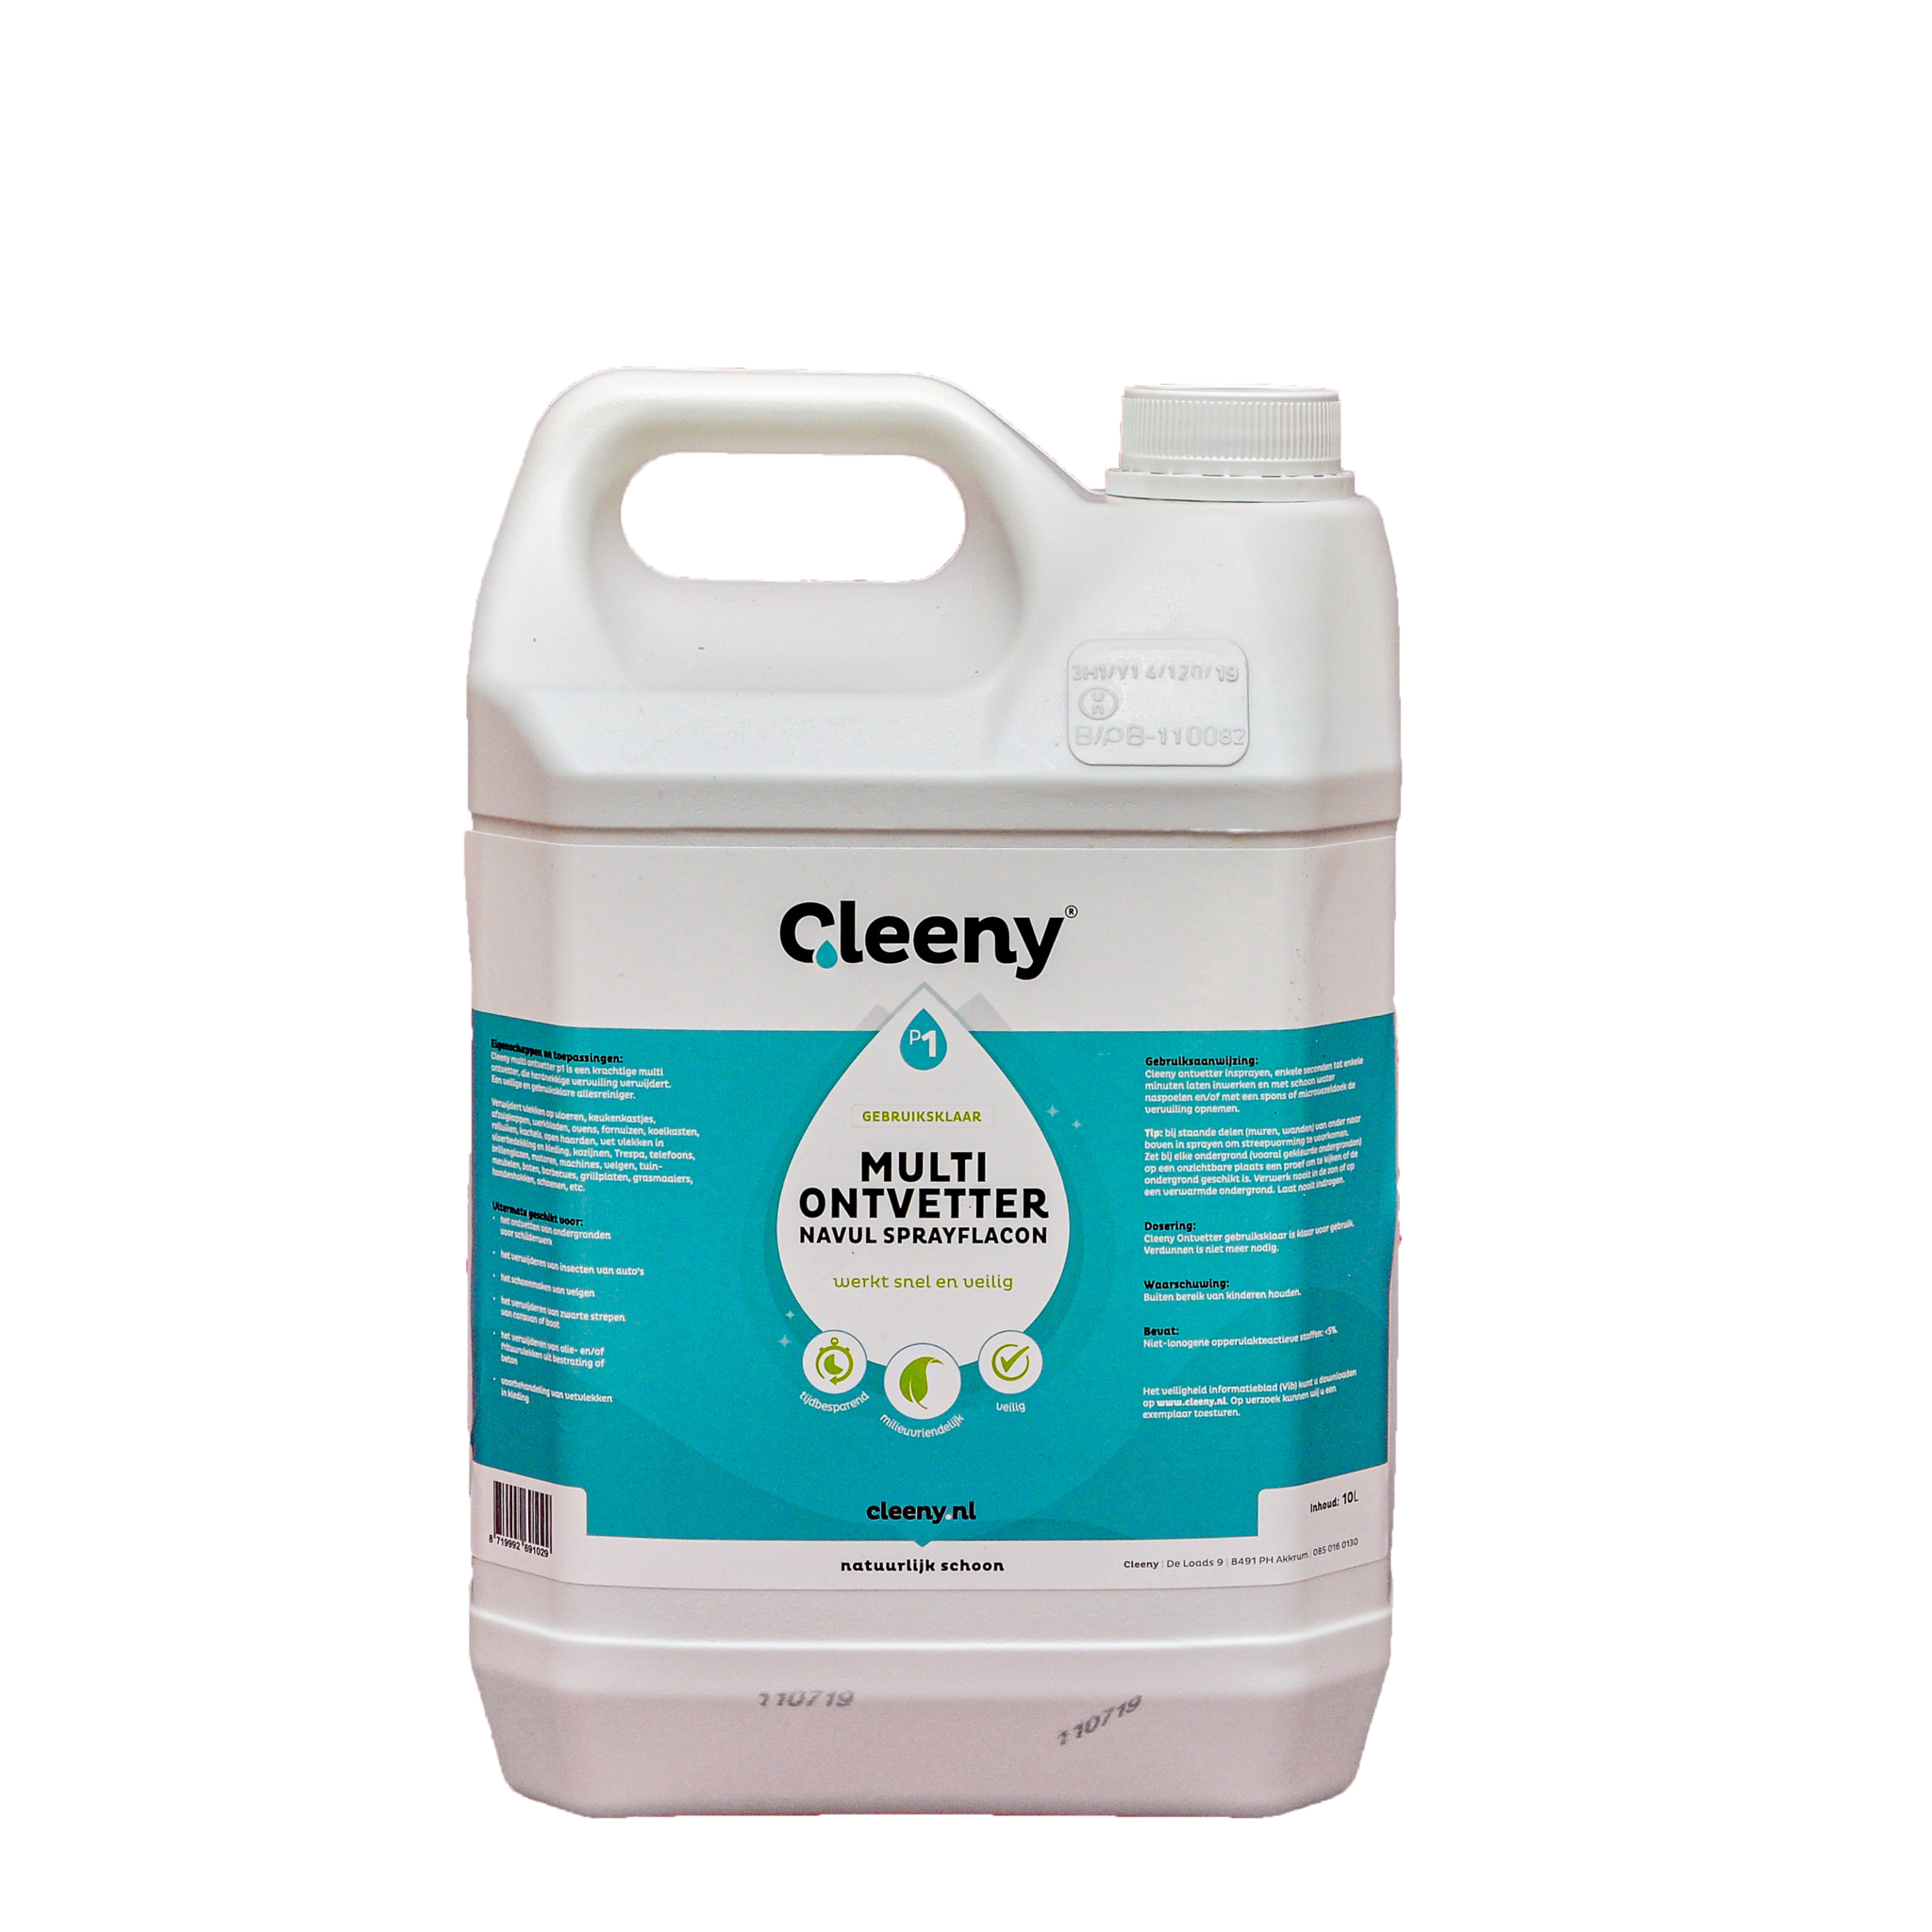 Cleeny Cleeny P1 degreaser, 10 liters Can ready for use